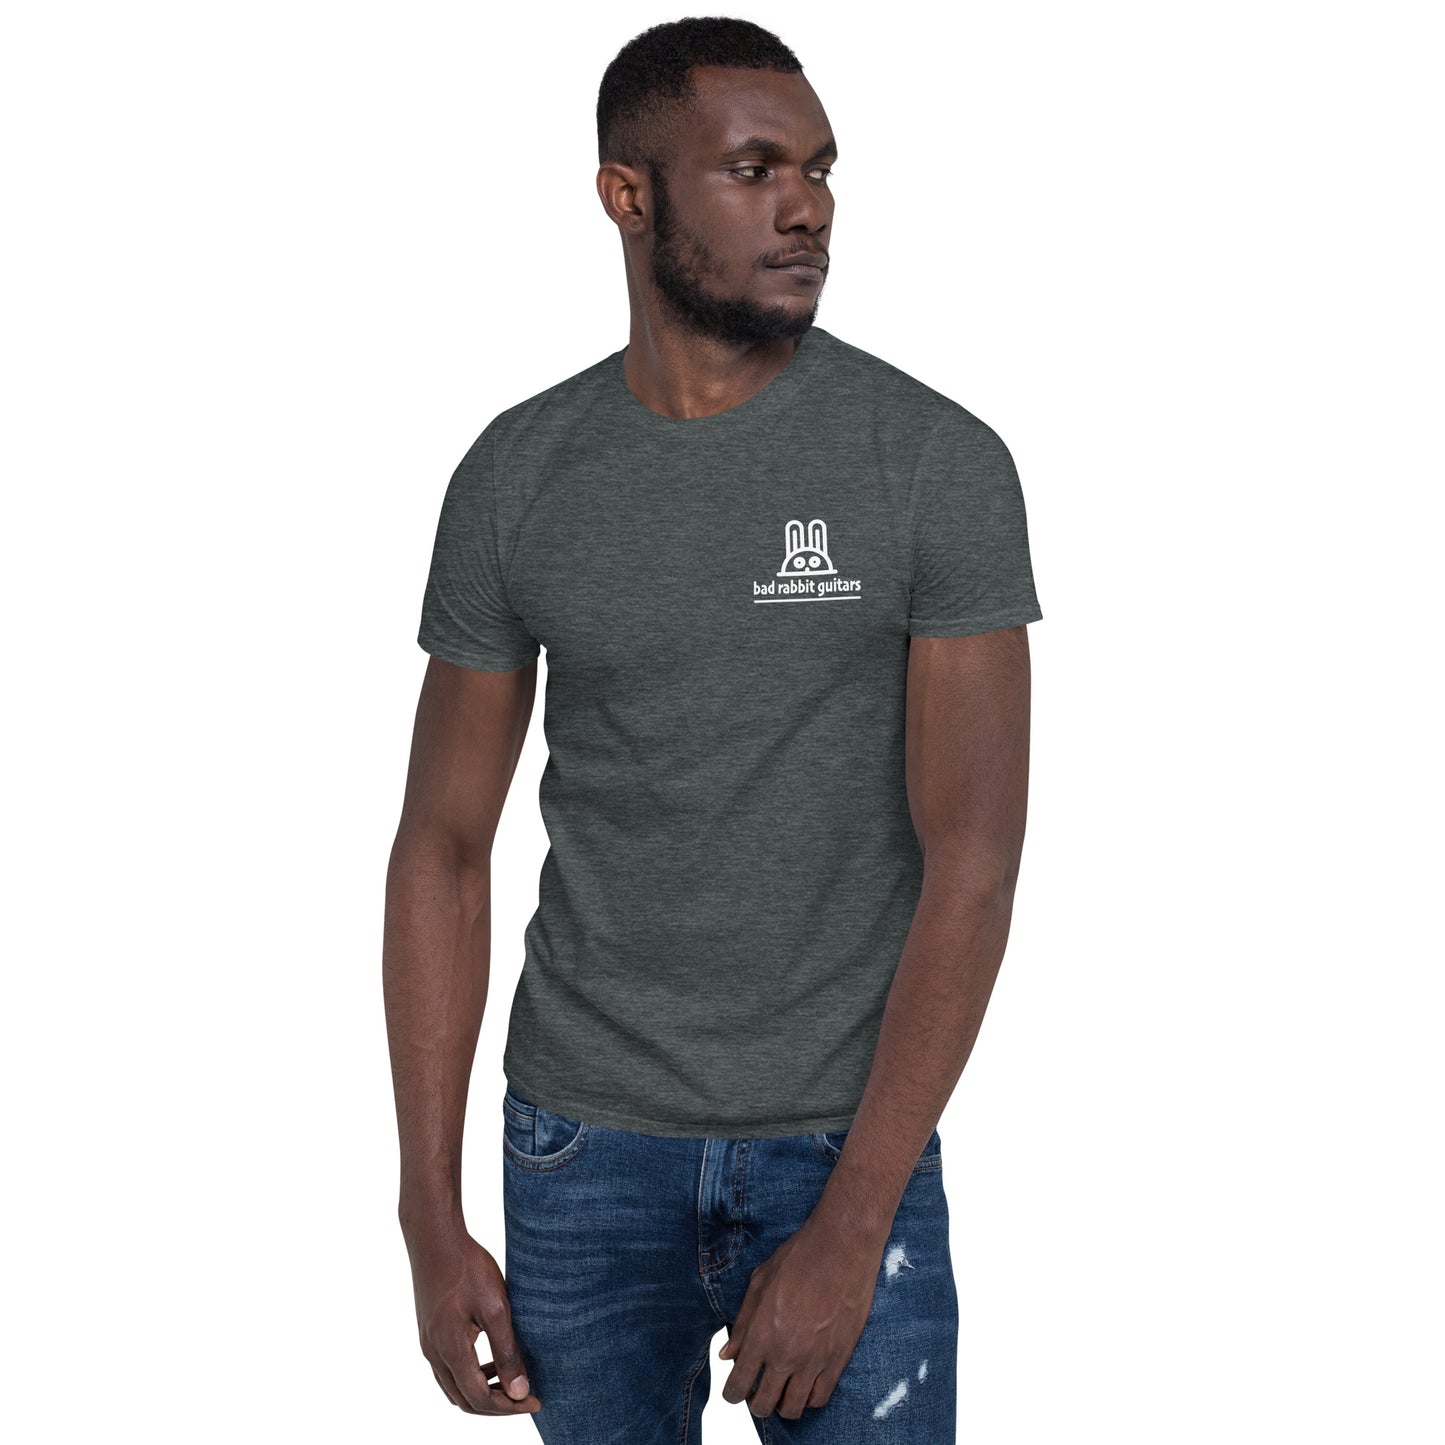 Unisex Soft-Style T-Shirt (Sport Grey) with smaller logo